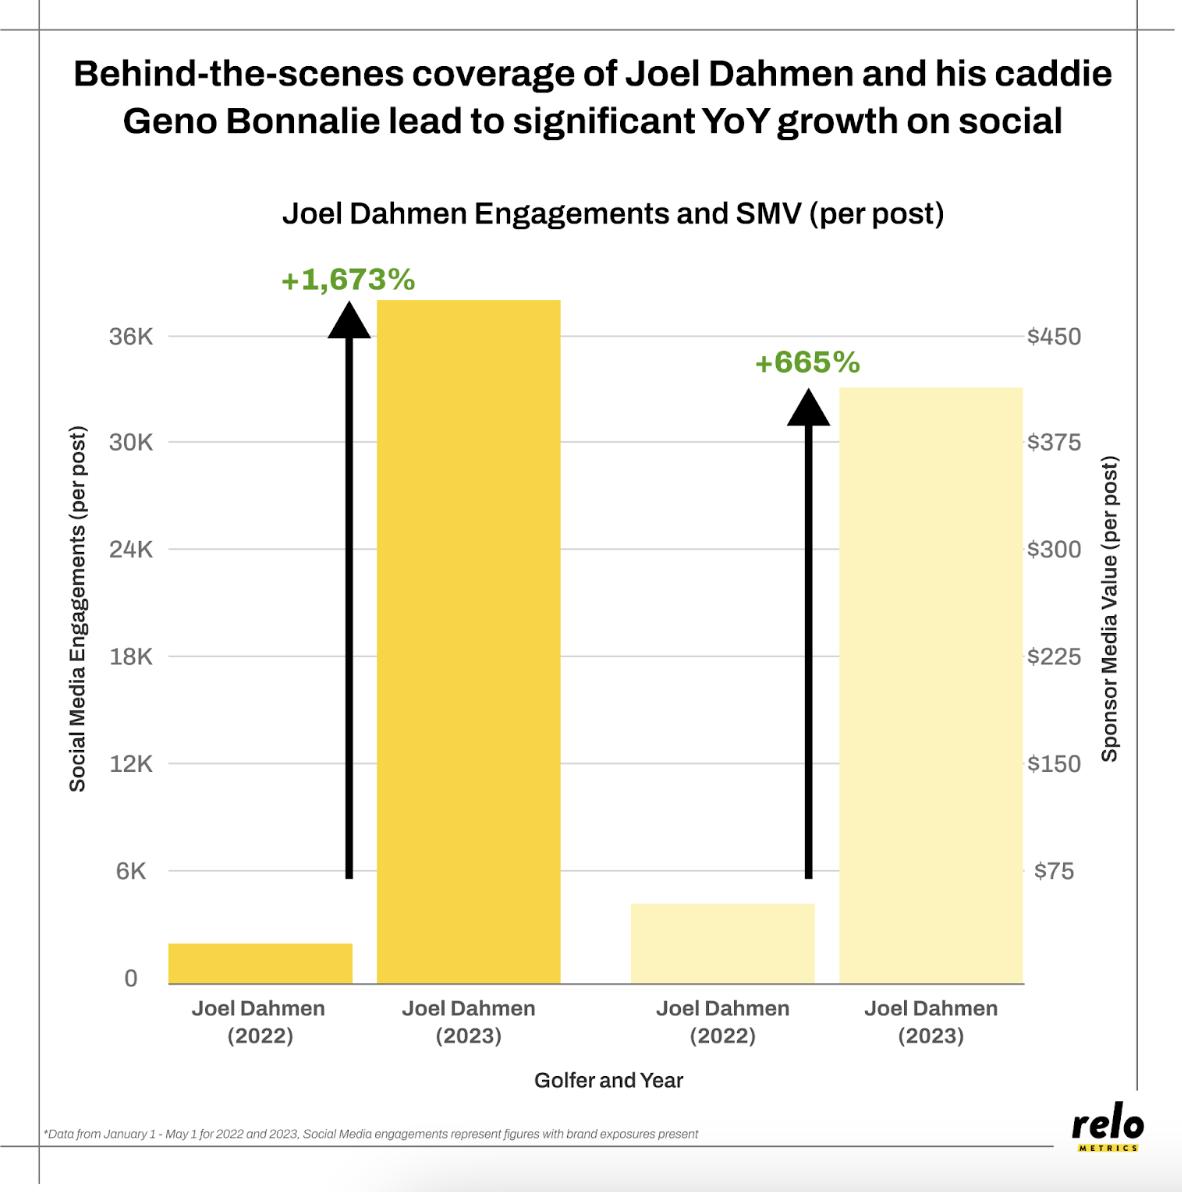 Behind-the-scenes coverage of Joel Dahmen and his caddie Geno Bonnalie lead to Significant YoY growth on social